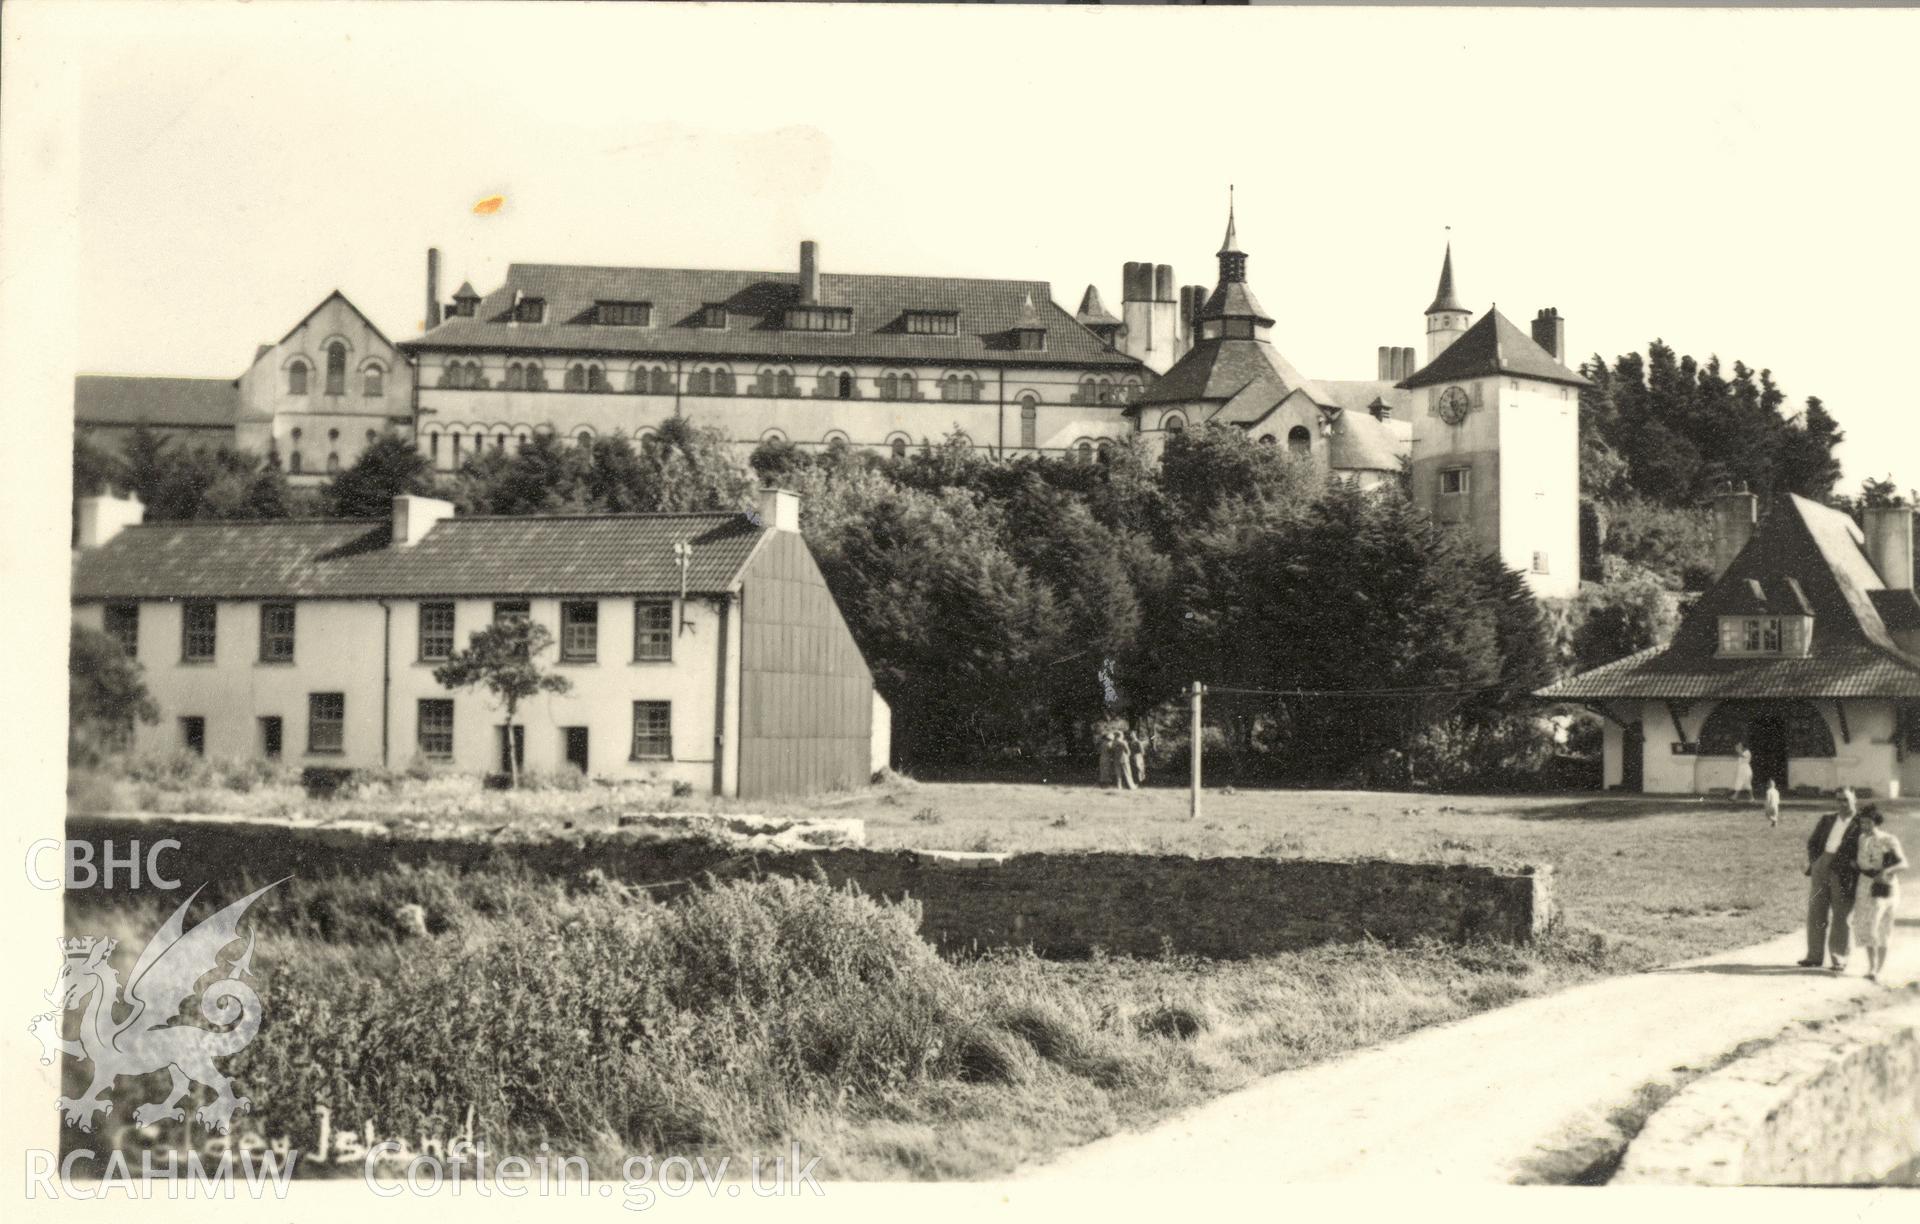 Digitised postcard image of Caldey Monastery, Caldey Island, Squibbs Studios. Produced by Parks and Gardens Data Services, from an original item in the Peter Davis Collection at Parks and Gardens UK. We hold only web-resolution images of this collection, suitable for viewing on screen and for research purposes only. We do not hold the original images, or publication quality scans.